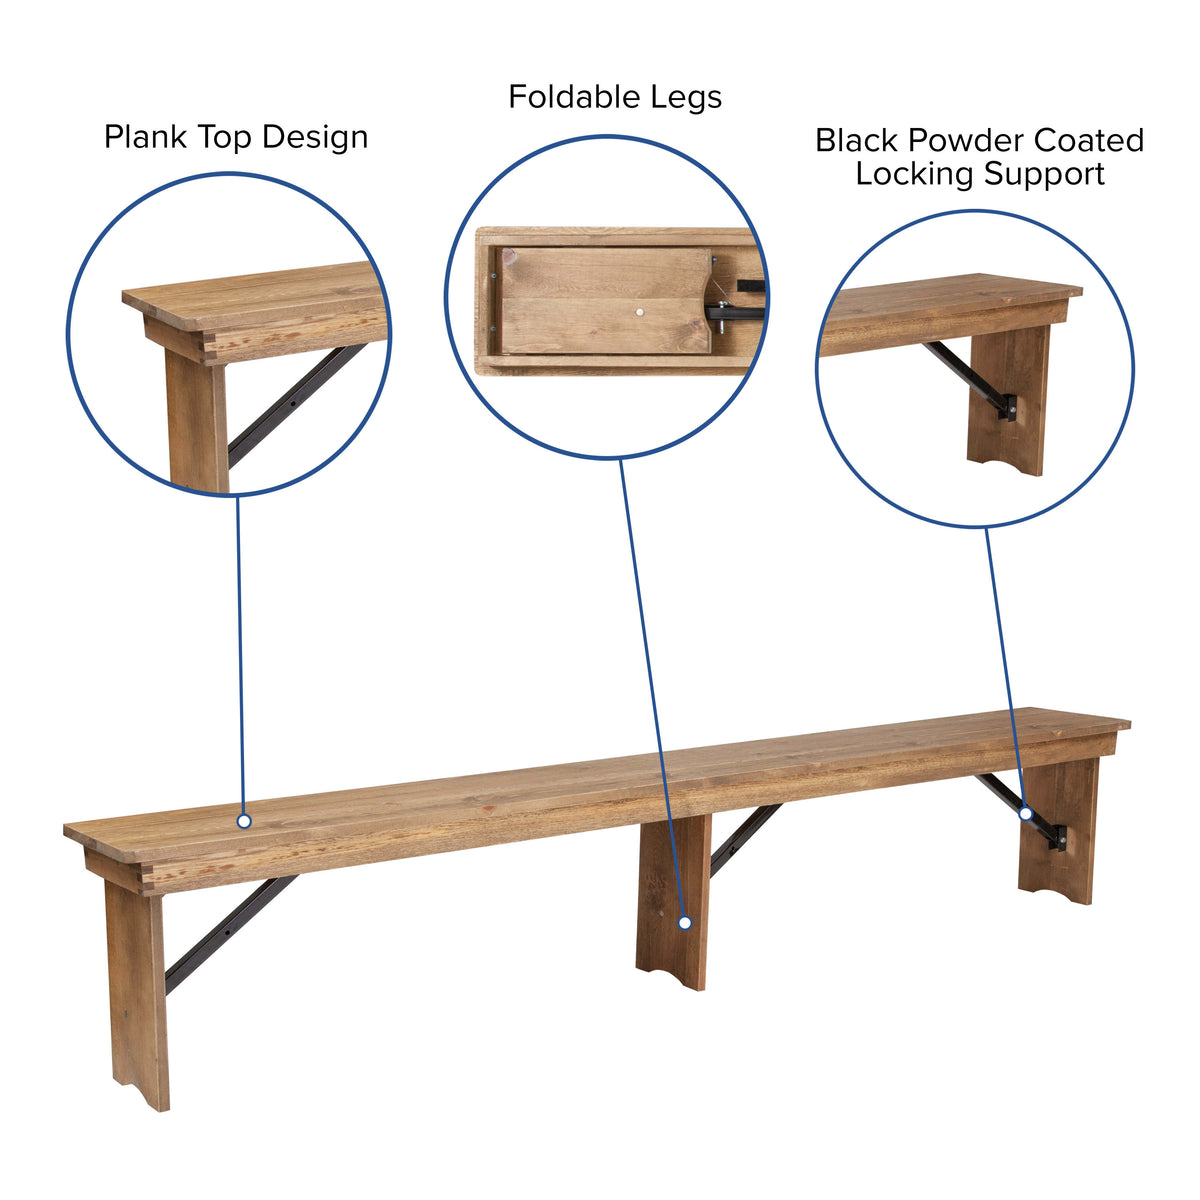 Antique Rustic |#| 8' x 12inch Antique Rustic Solid Pine Folding Farm Bench with 3 Legs